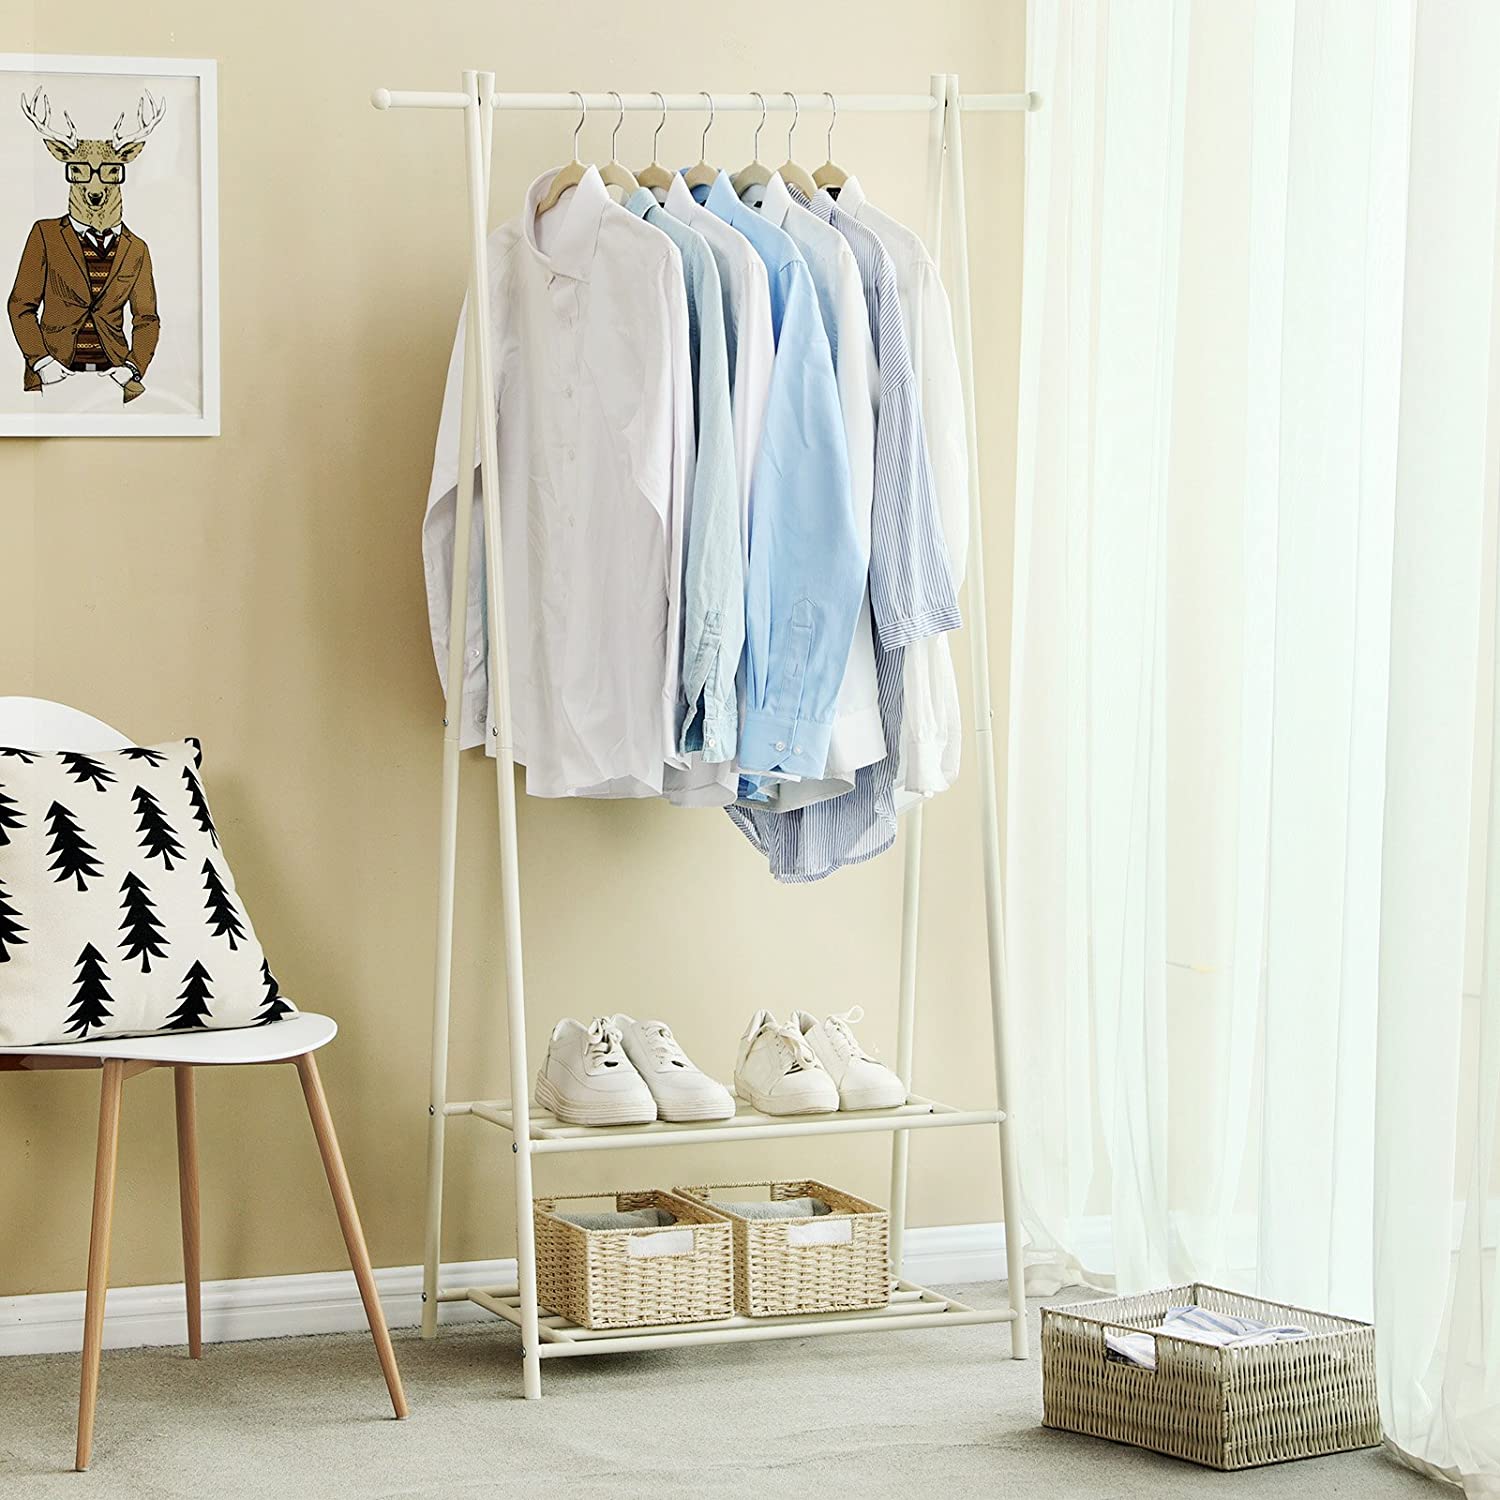 Coat Rack, Coat Stand, Clothes Rack with 2-Tier Storage Shelf for Shoes and Baskets, Metal Frame, Space-saving